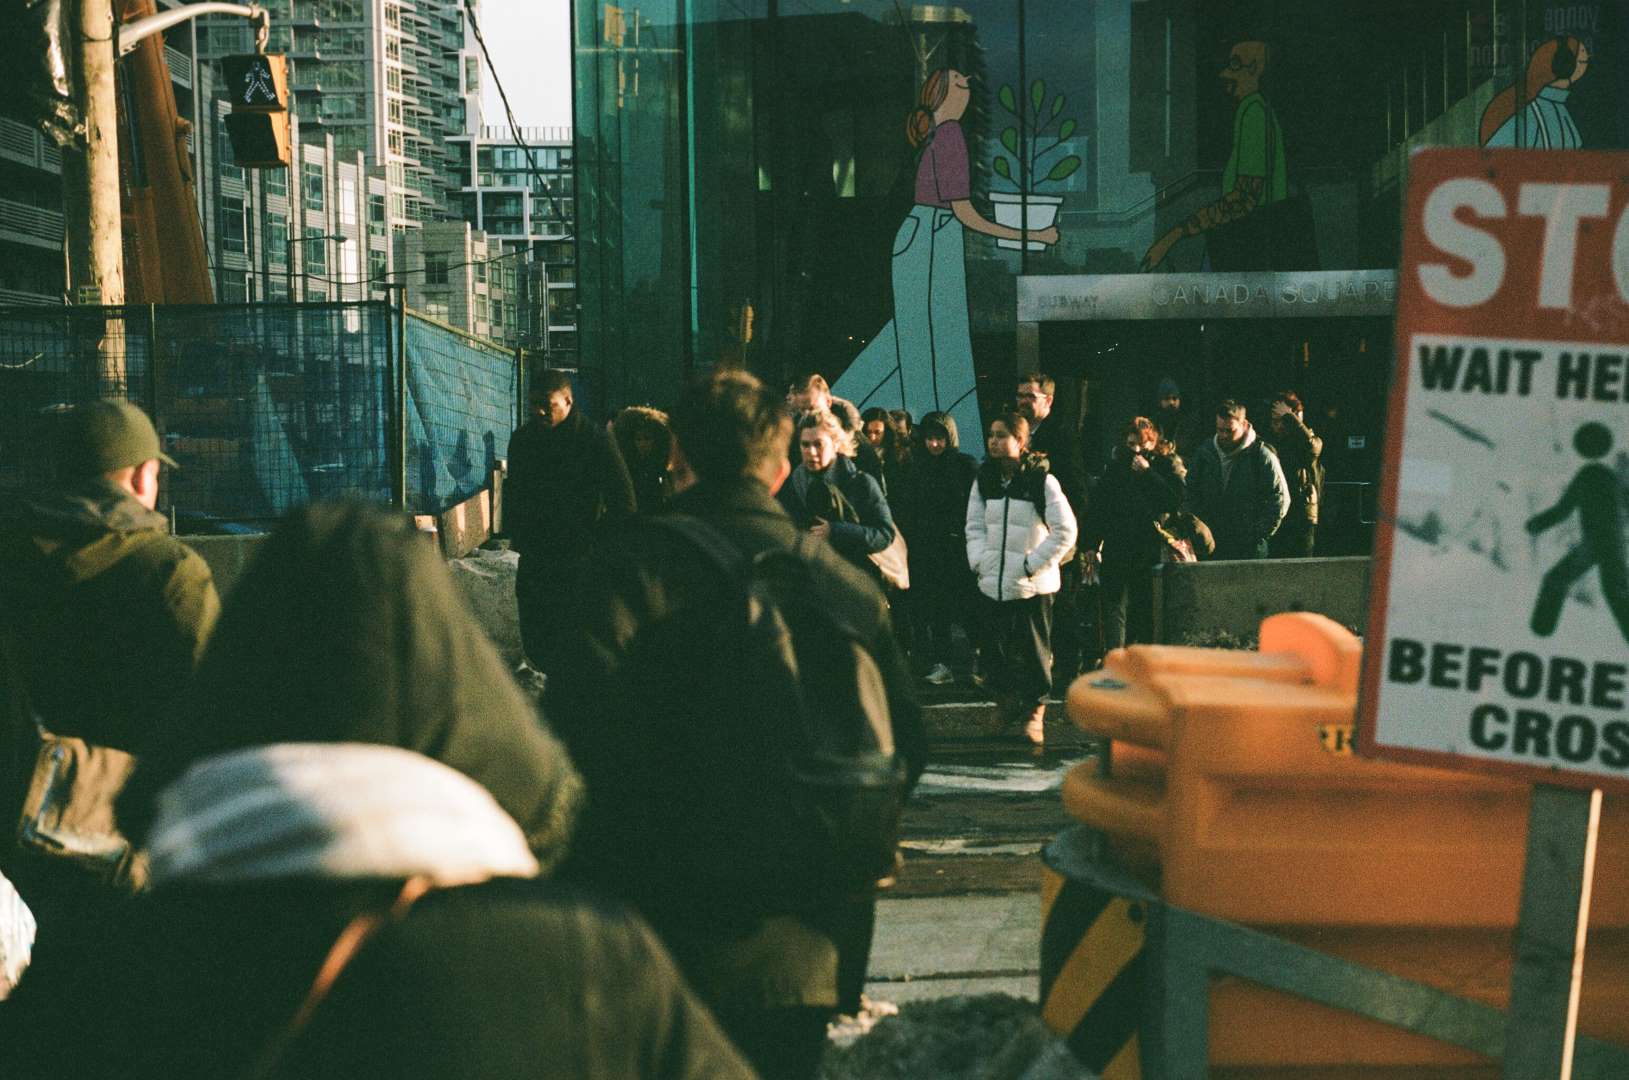 A colour photograph of a crowd of people waiting to cross the street with the sun strongly illuminating them from the side